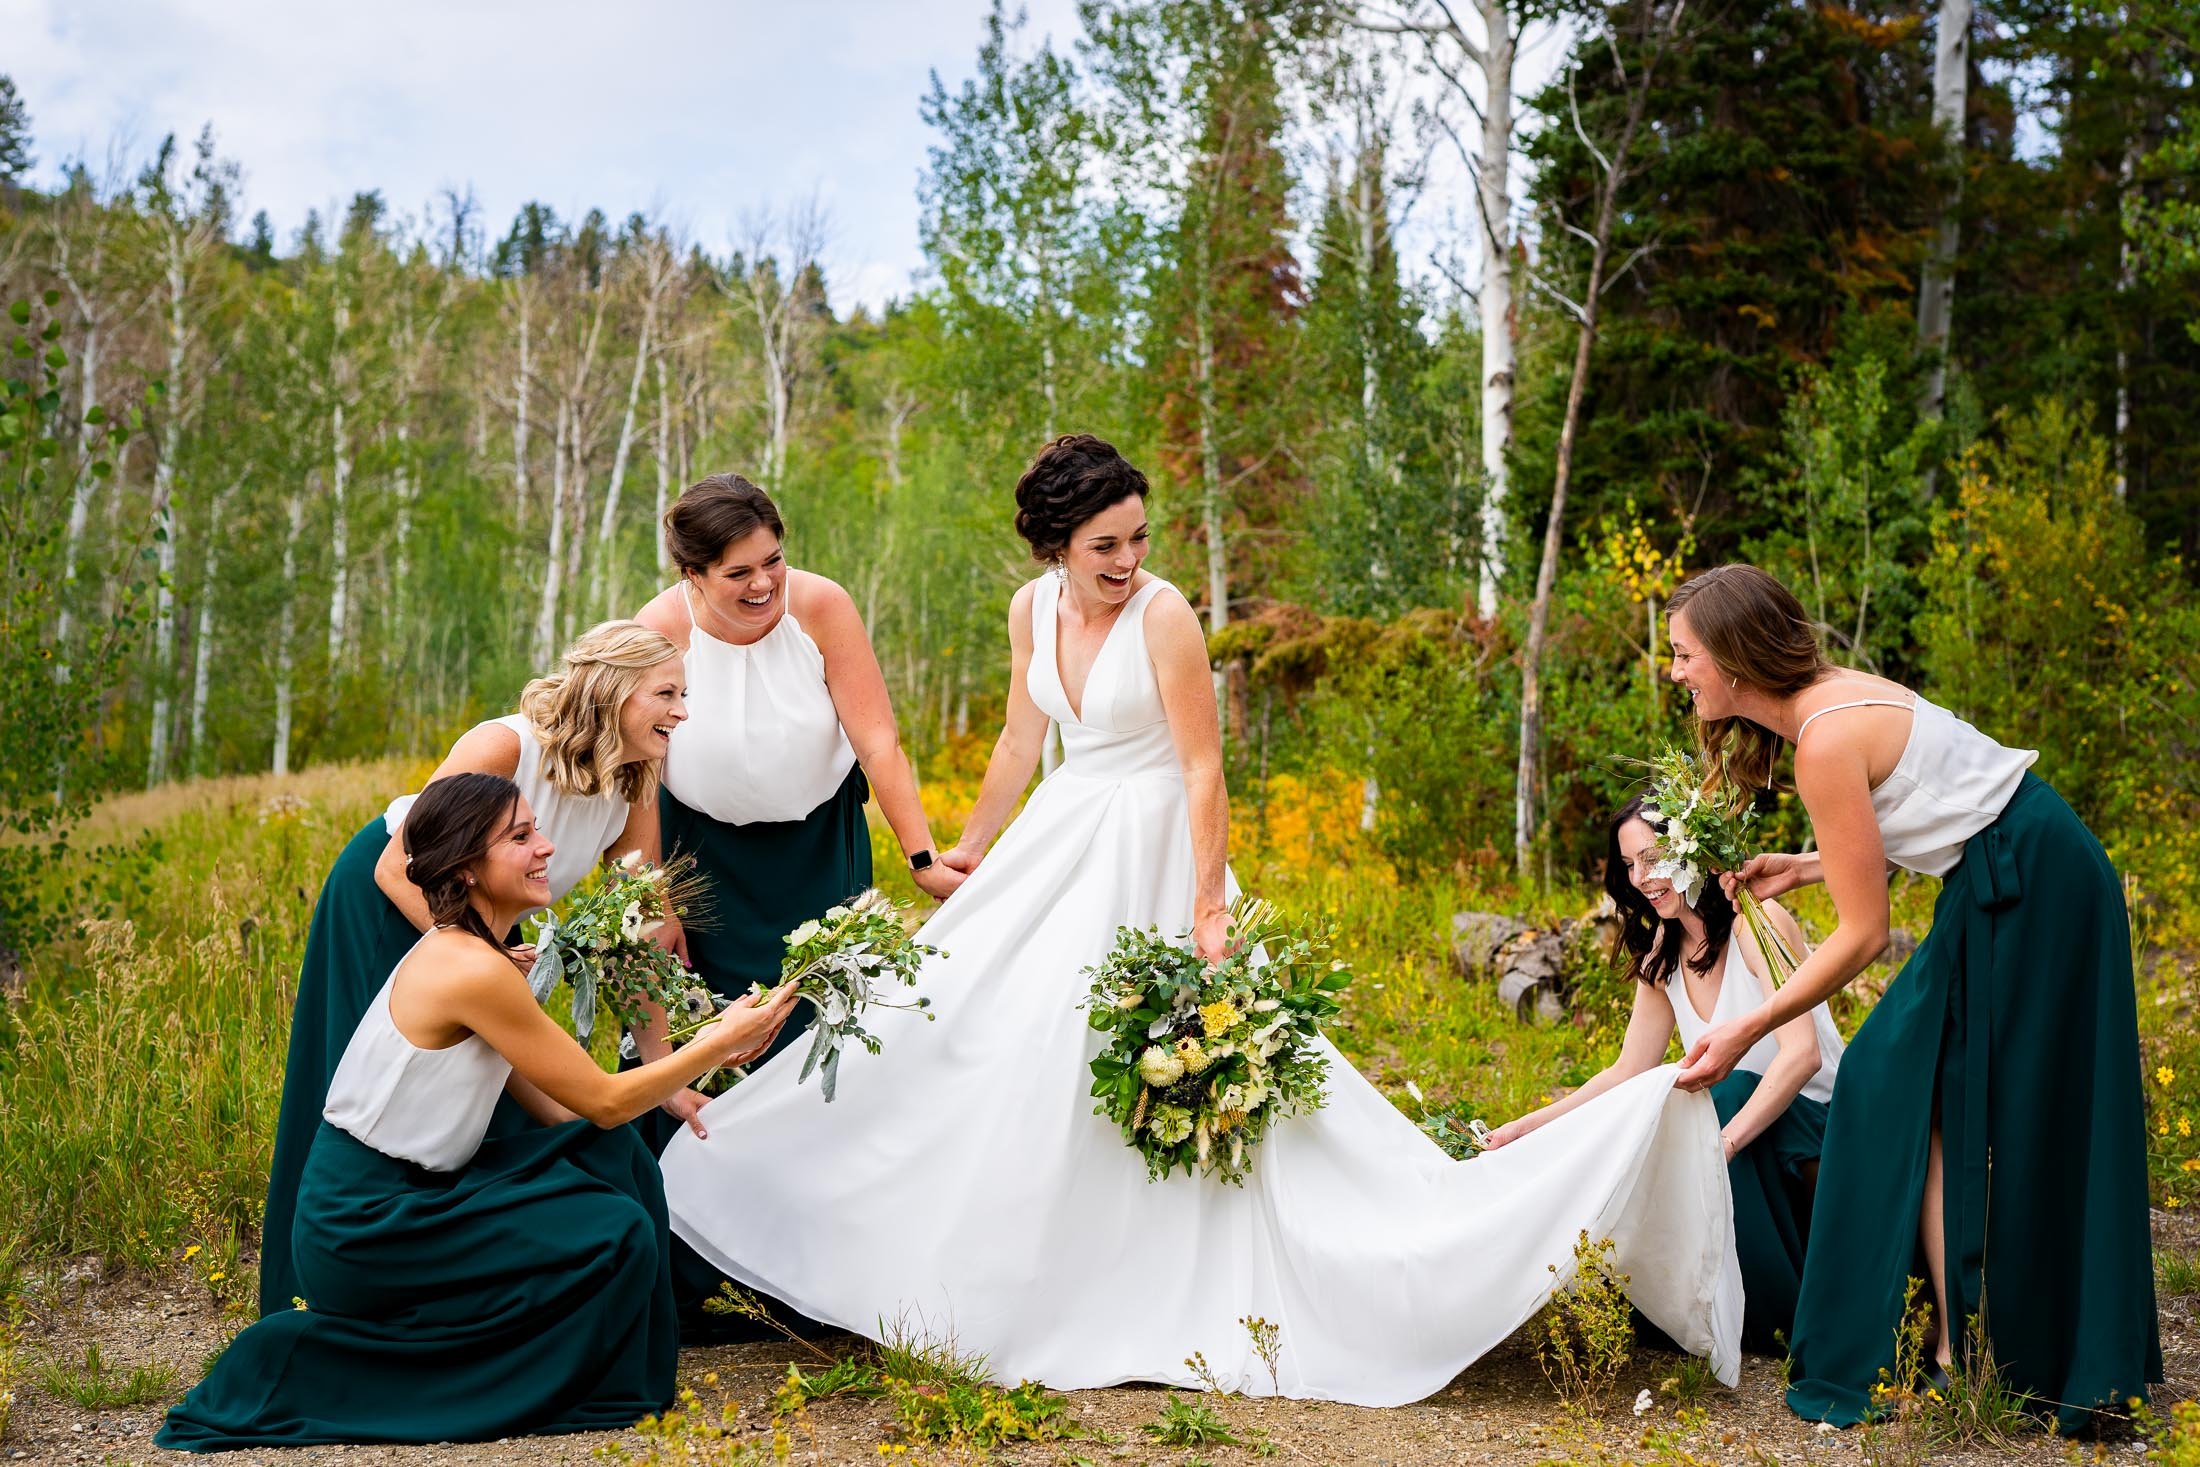 Bride and bridesmaids pose for a portrait surrounded by aspens in a meadow, wedding, wedding photos, wedding photography, wedding photographer, wedding inspiration, wedding photo inspiration, wedding portraits, wedding ceremony, wedding reception, mountain wedding, Catholic Church wedding, Catholic Church wedding photos, Catholic Church wedding photography, Catholic Church wedding photographer, Catholic Church wedding inspiration, Catholic Church wedding venue, Steamboat Springs wedding, Steamboat Springs wedding photos, Steamboat Springs wedding photography, Steamboat Springs wedding photographer, Colorado wedding, Colorado wedding photos, Colorado wedding photography, Colorado wedding photographer, Colorado mountain wedding, Colorado wedding inspiration